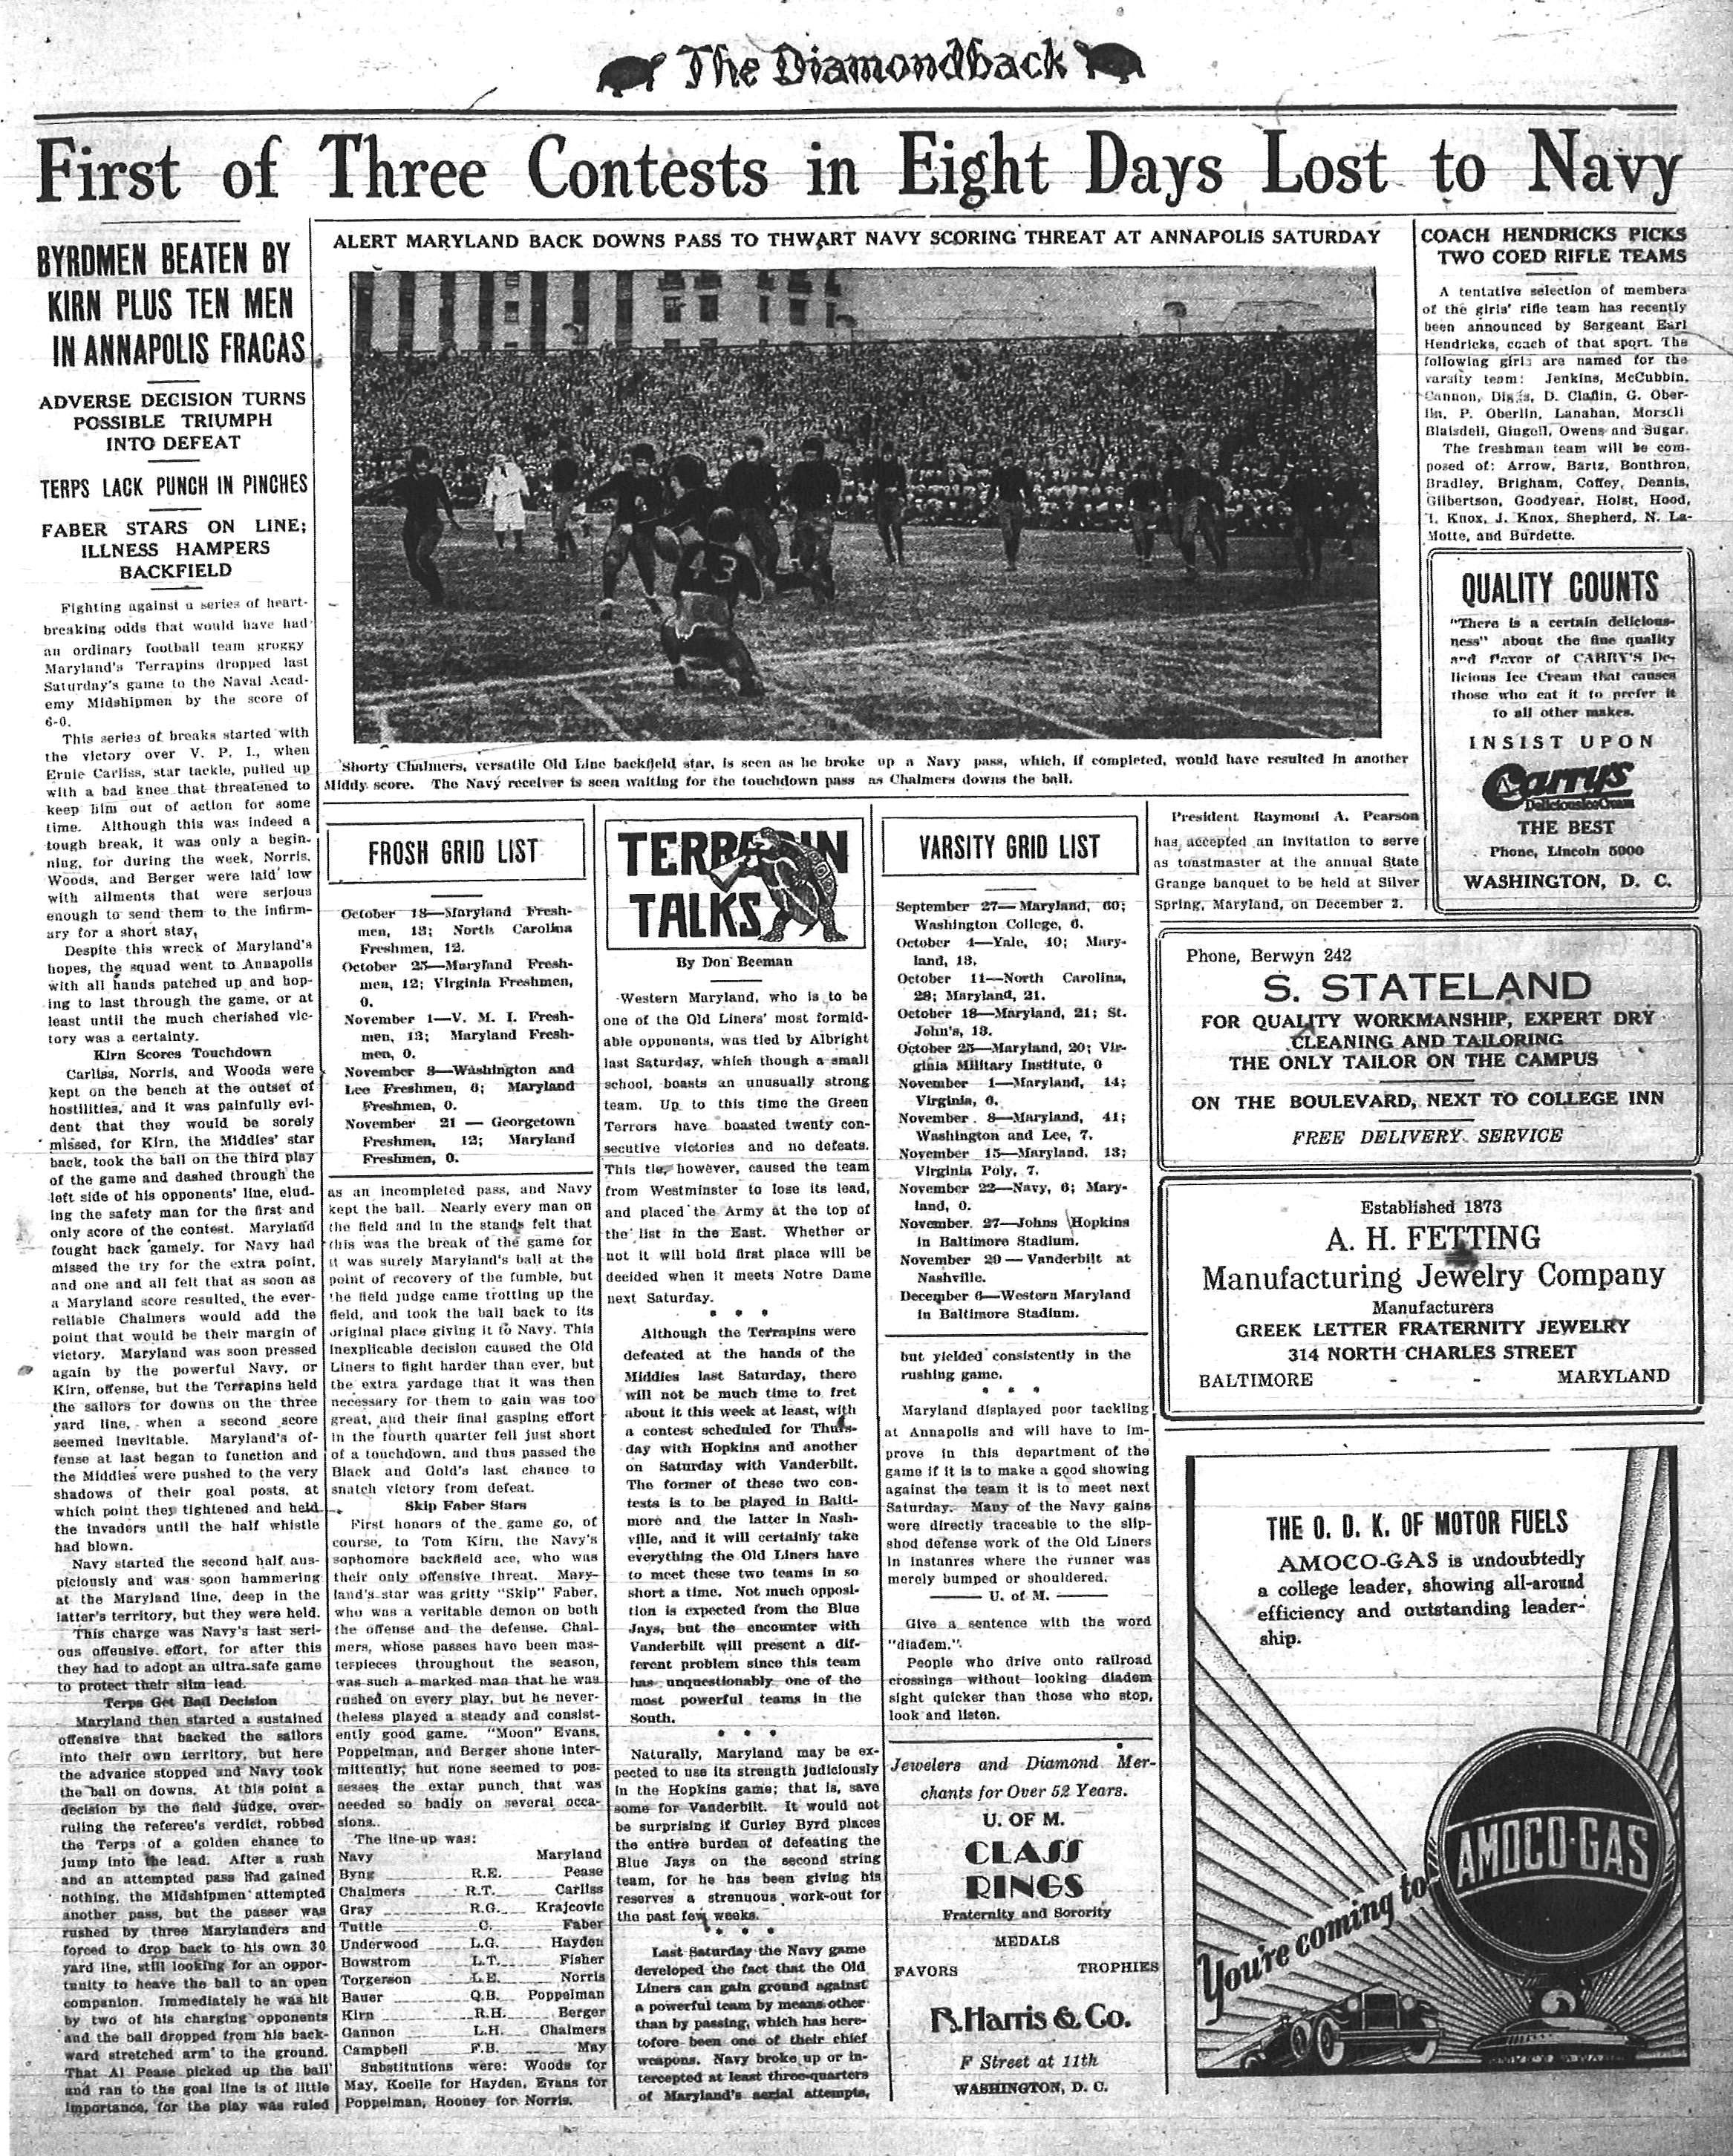 MD vs Navy 1930 clipping_crop